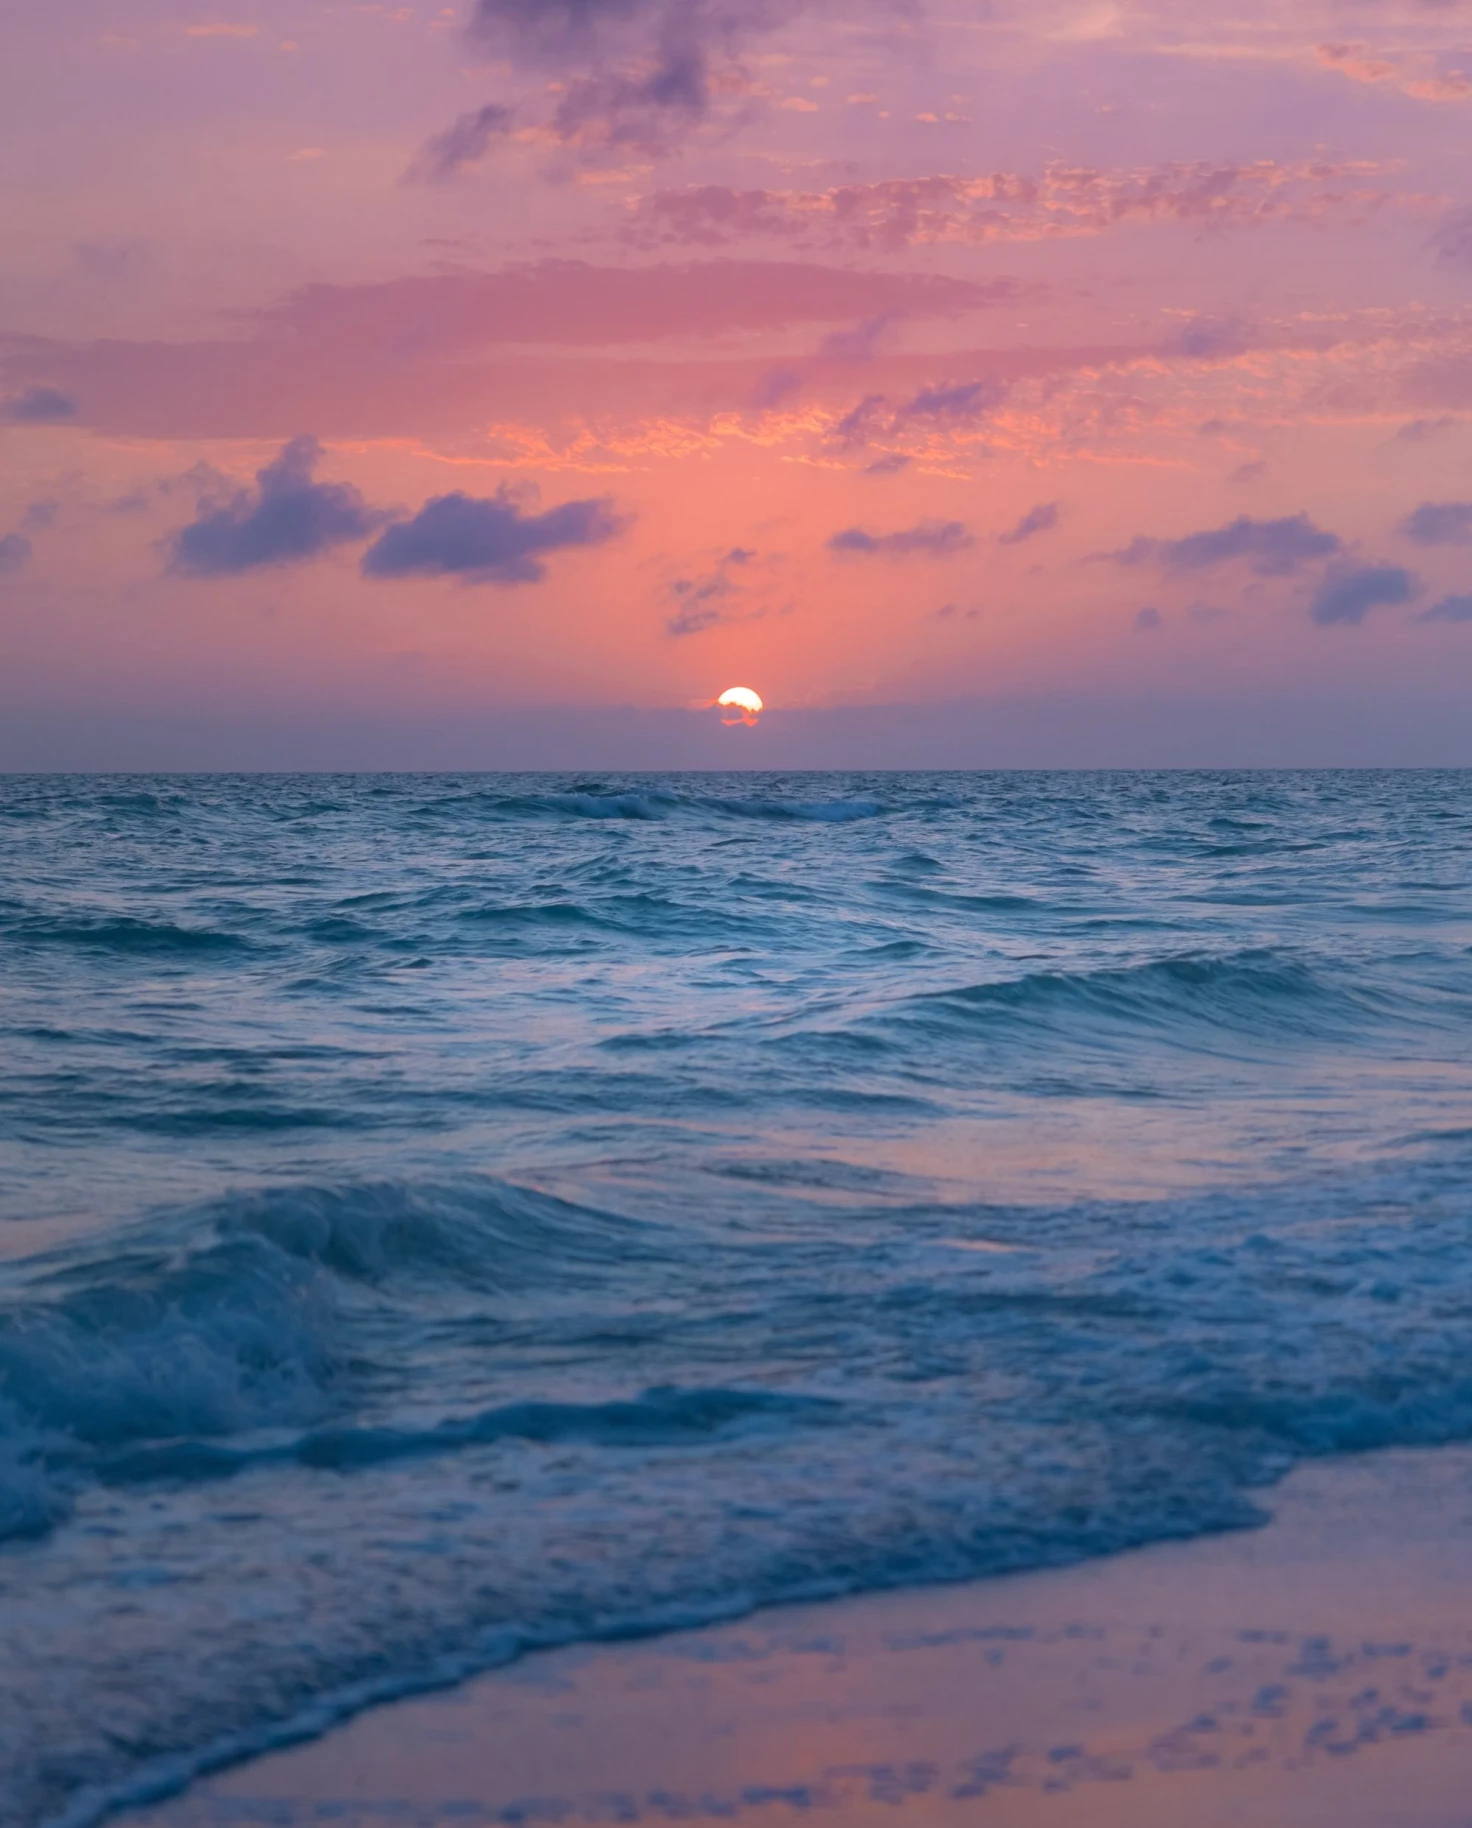 a final peak at the white sun during a pink and purple sunset over the ocean 